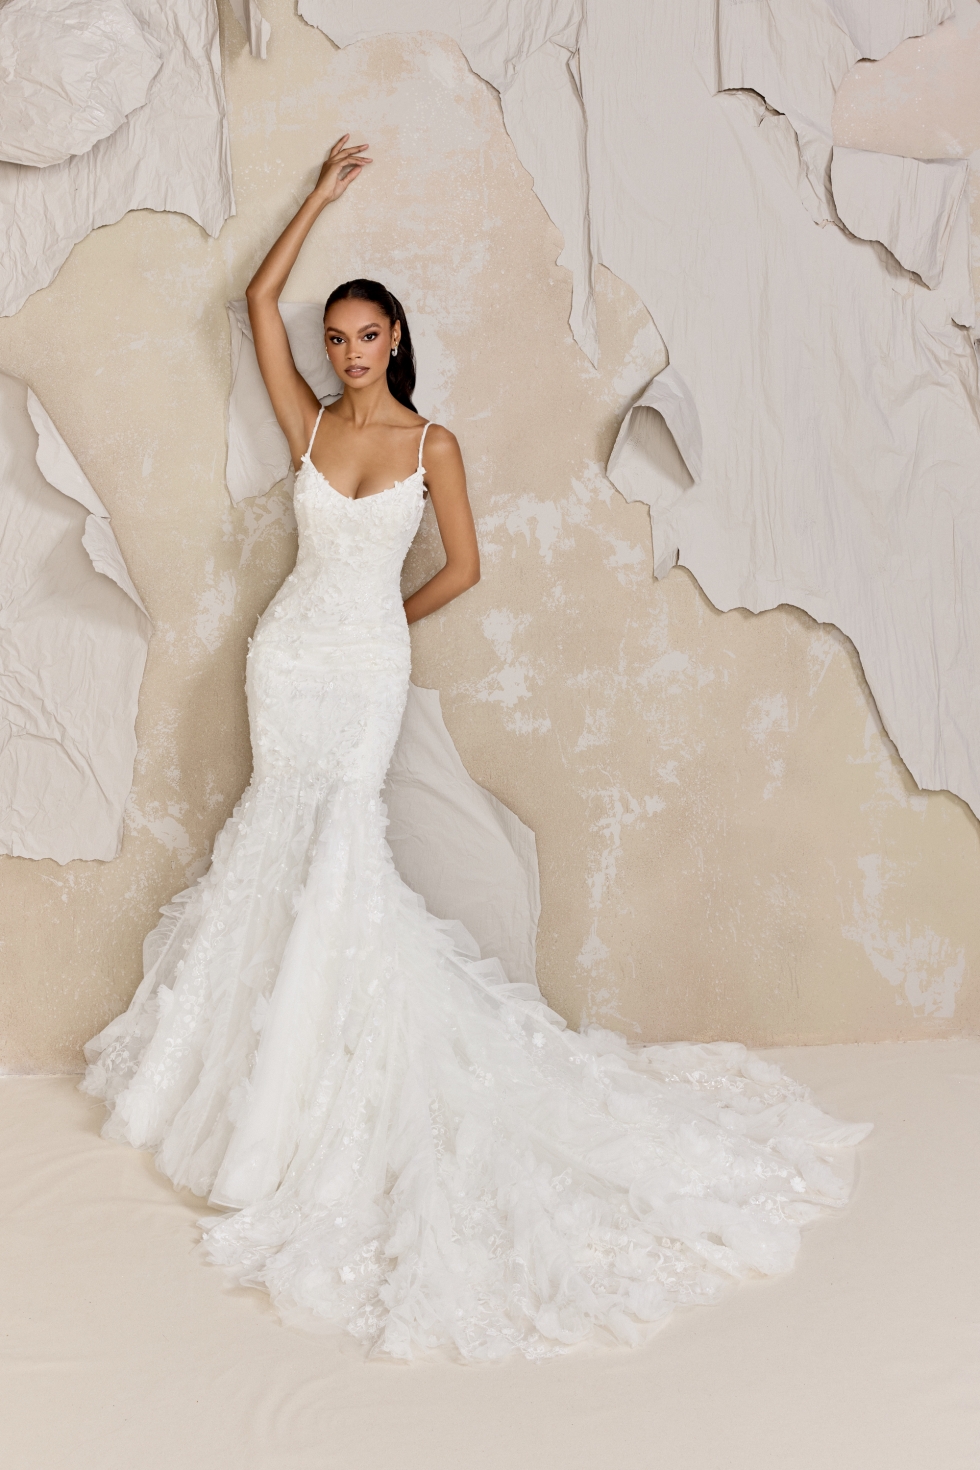 The 2025 Spring/Summer Bridal Collection by Justin Alexander